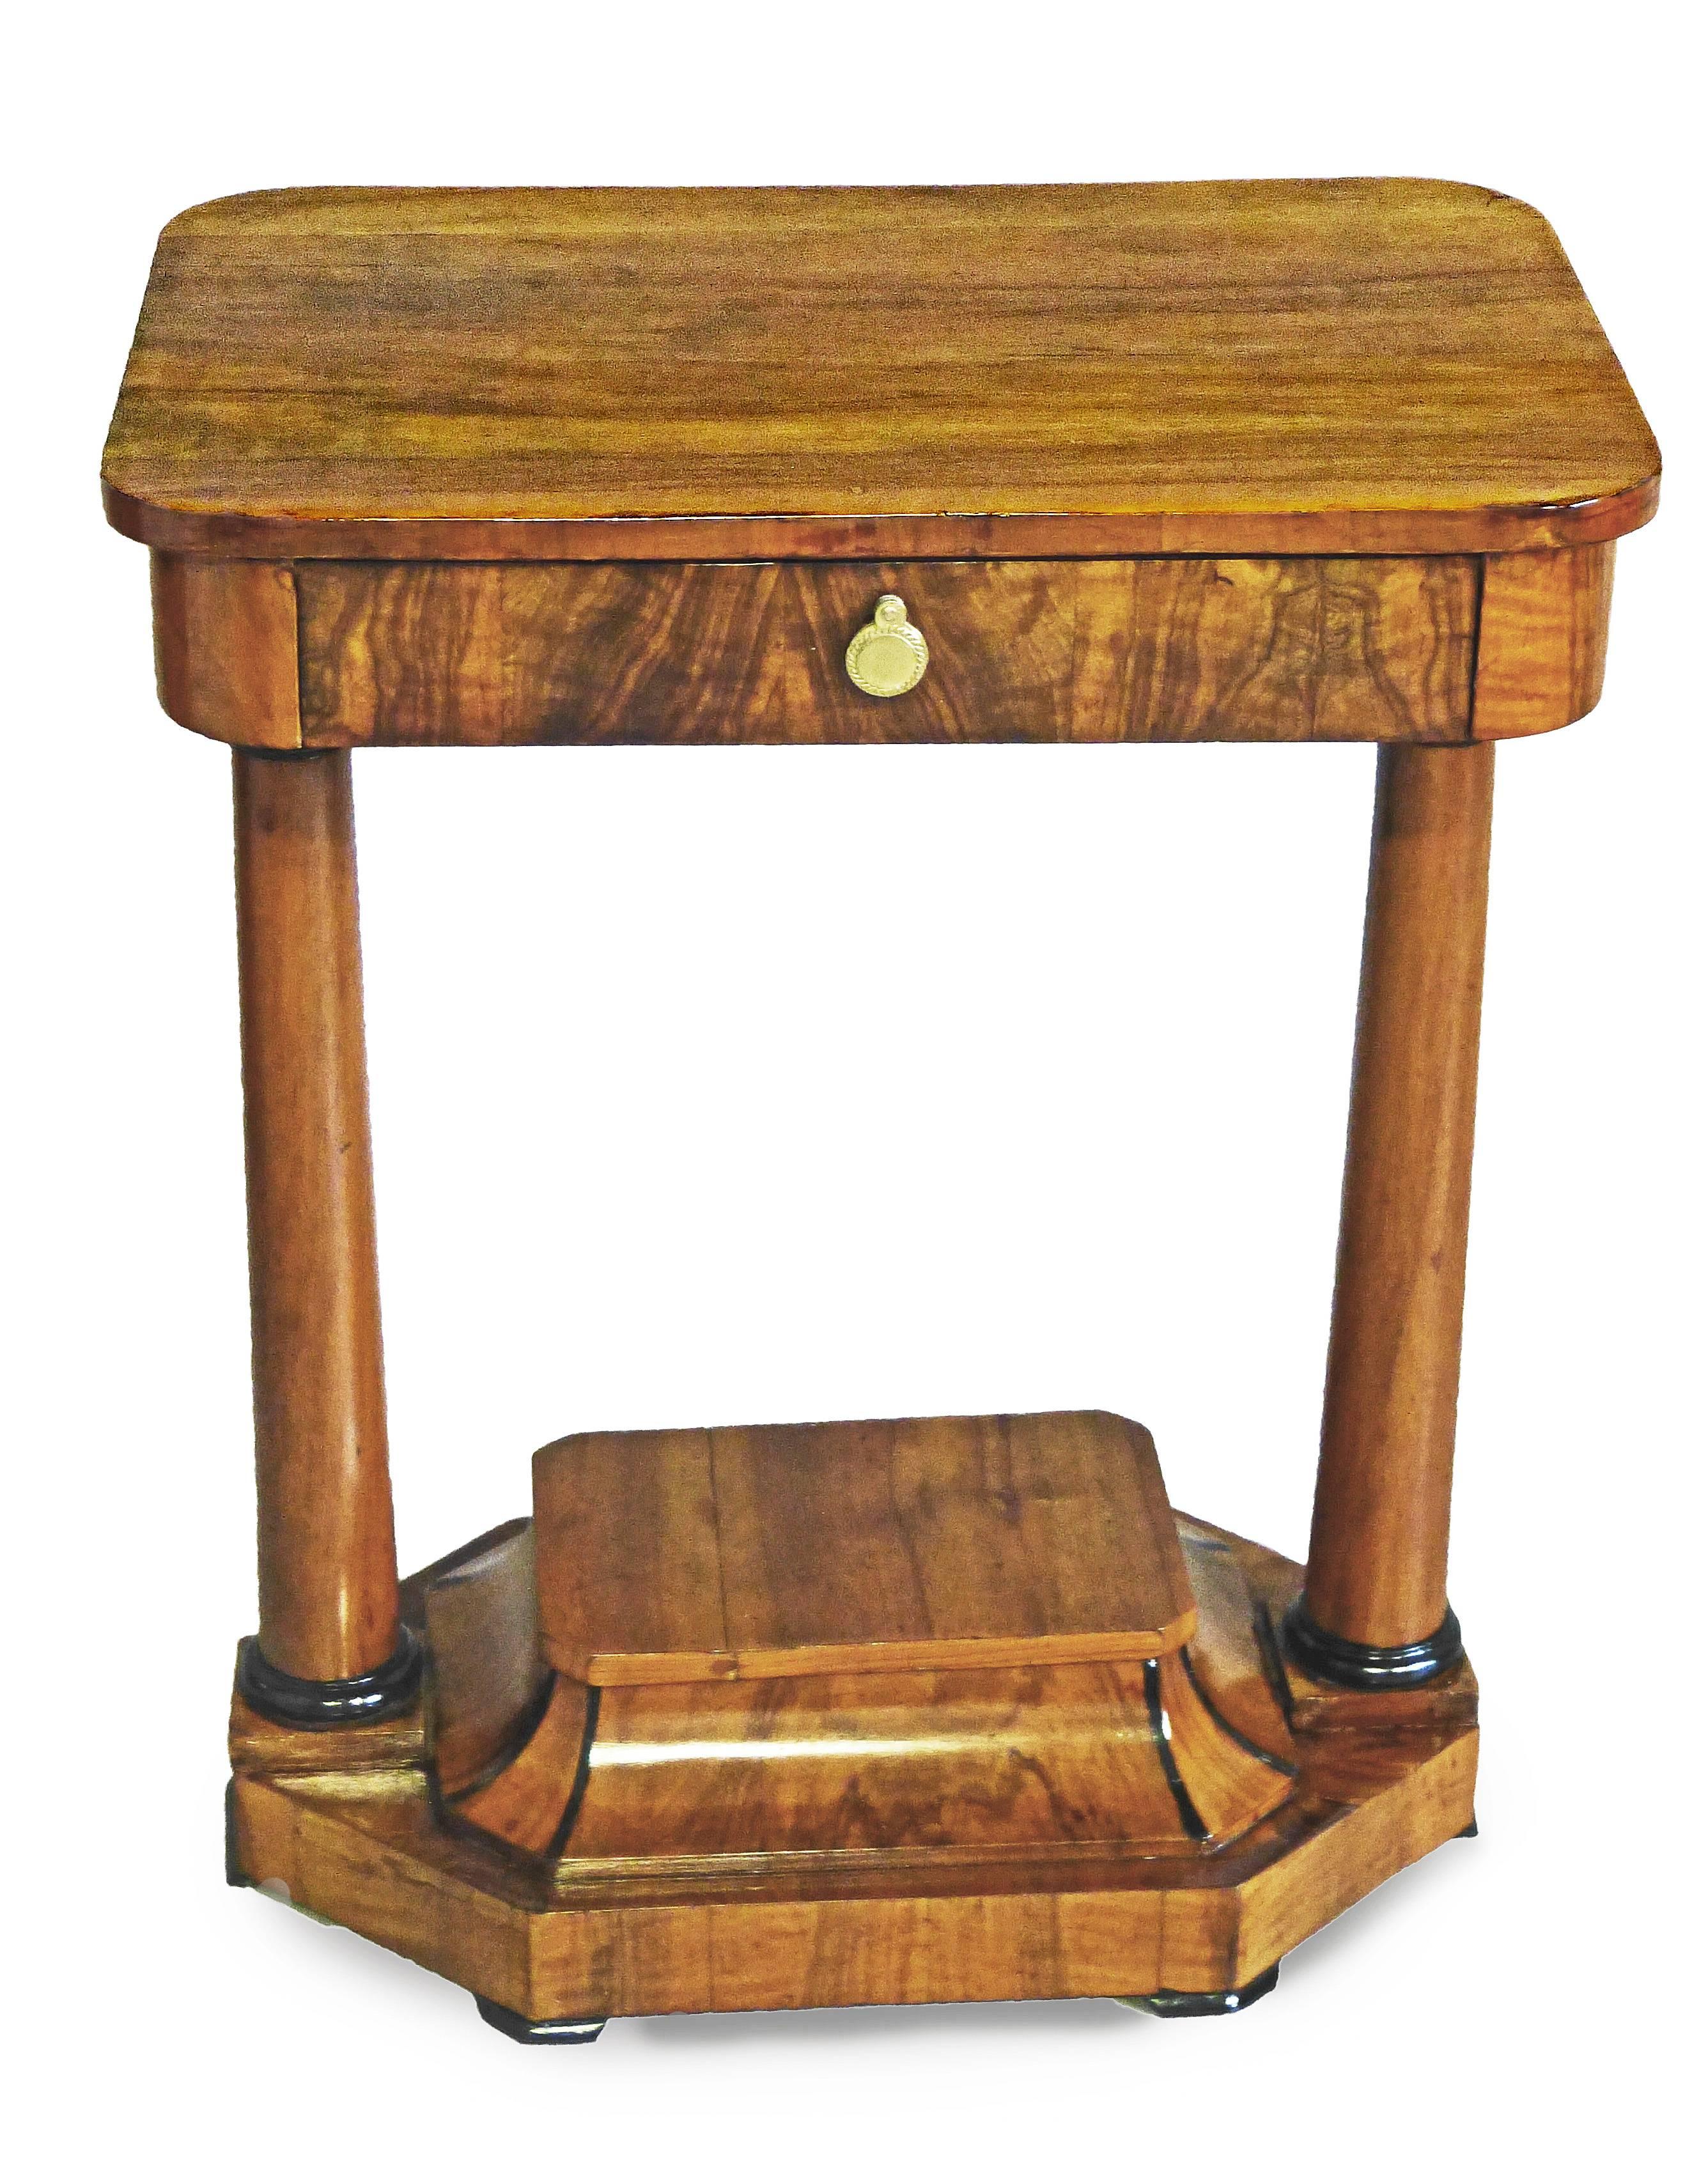 Biedermeier sewing / work table of figured walnut and of unusual design supported by 2 reverse tapering columns with ebonized tops and bottoms. The main part of rectangular shape with rounded corners, all supported by a base with ebonized trim